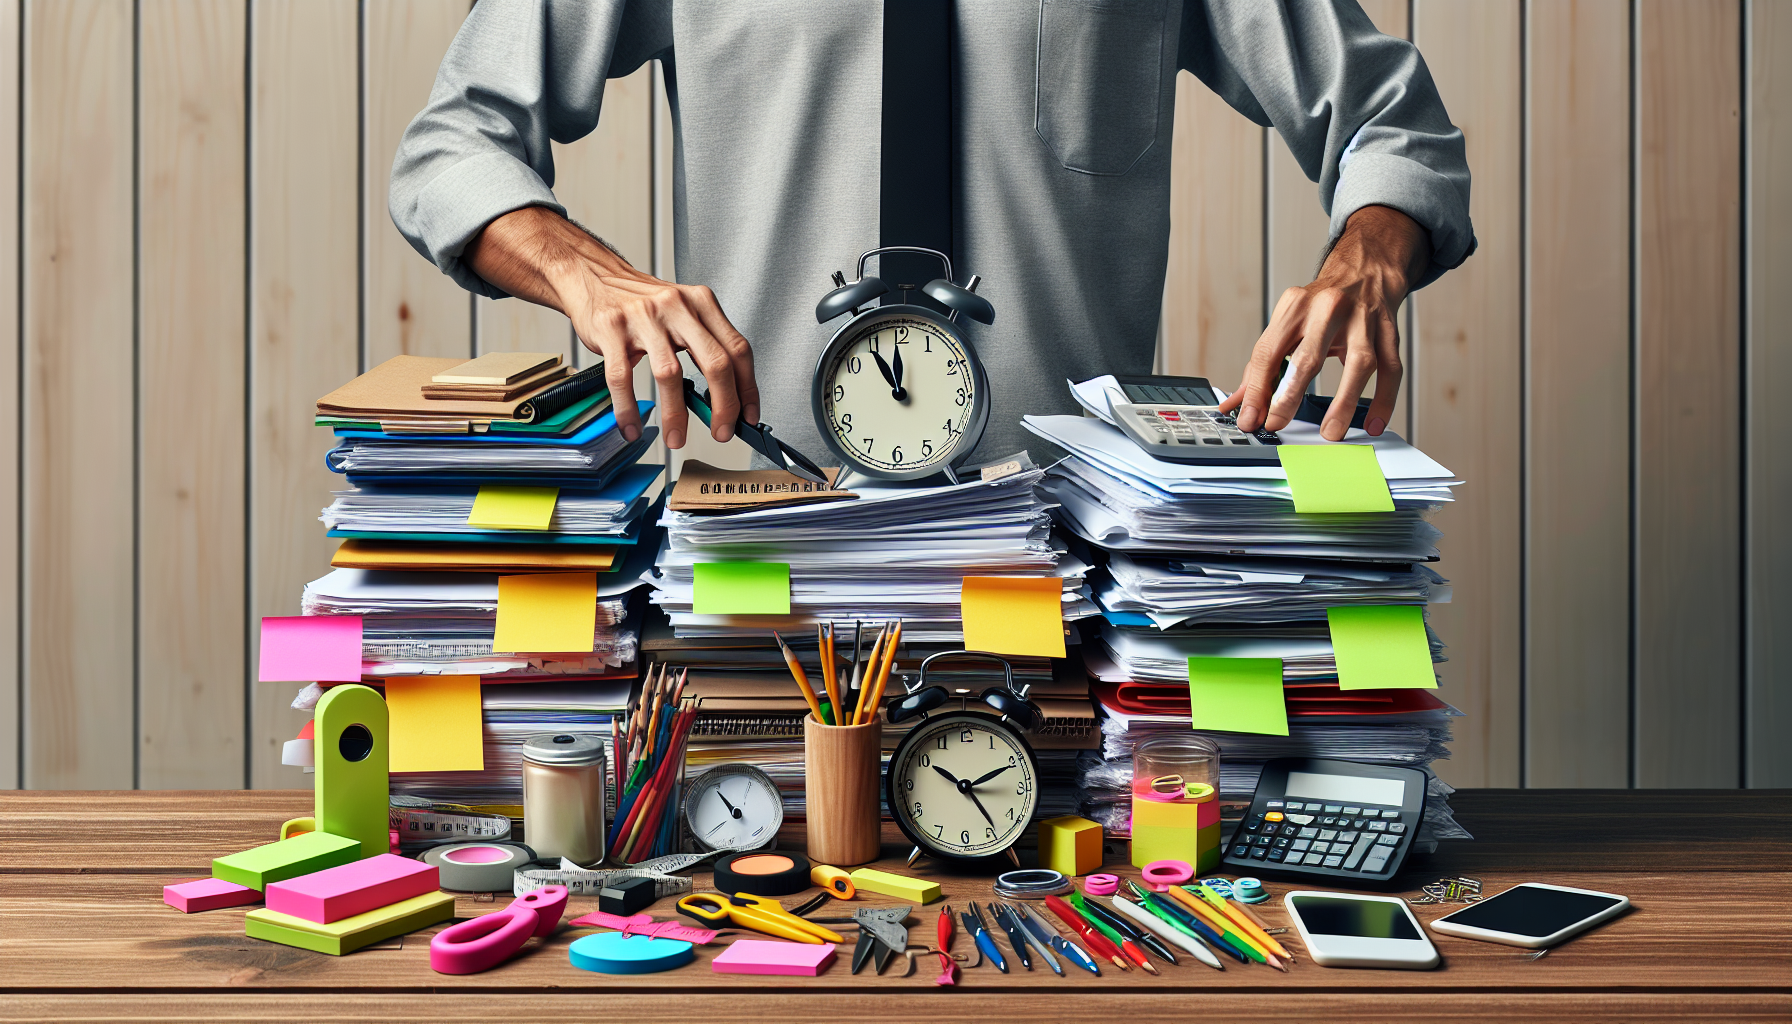 Illustration of a person organizing various tasks and documents on a desk